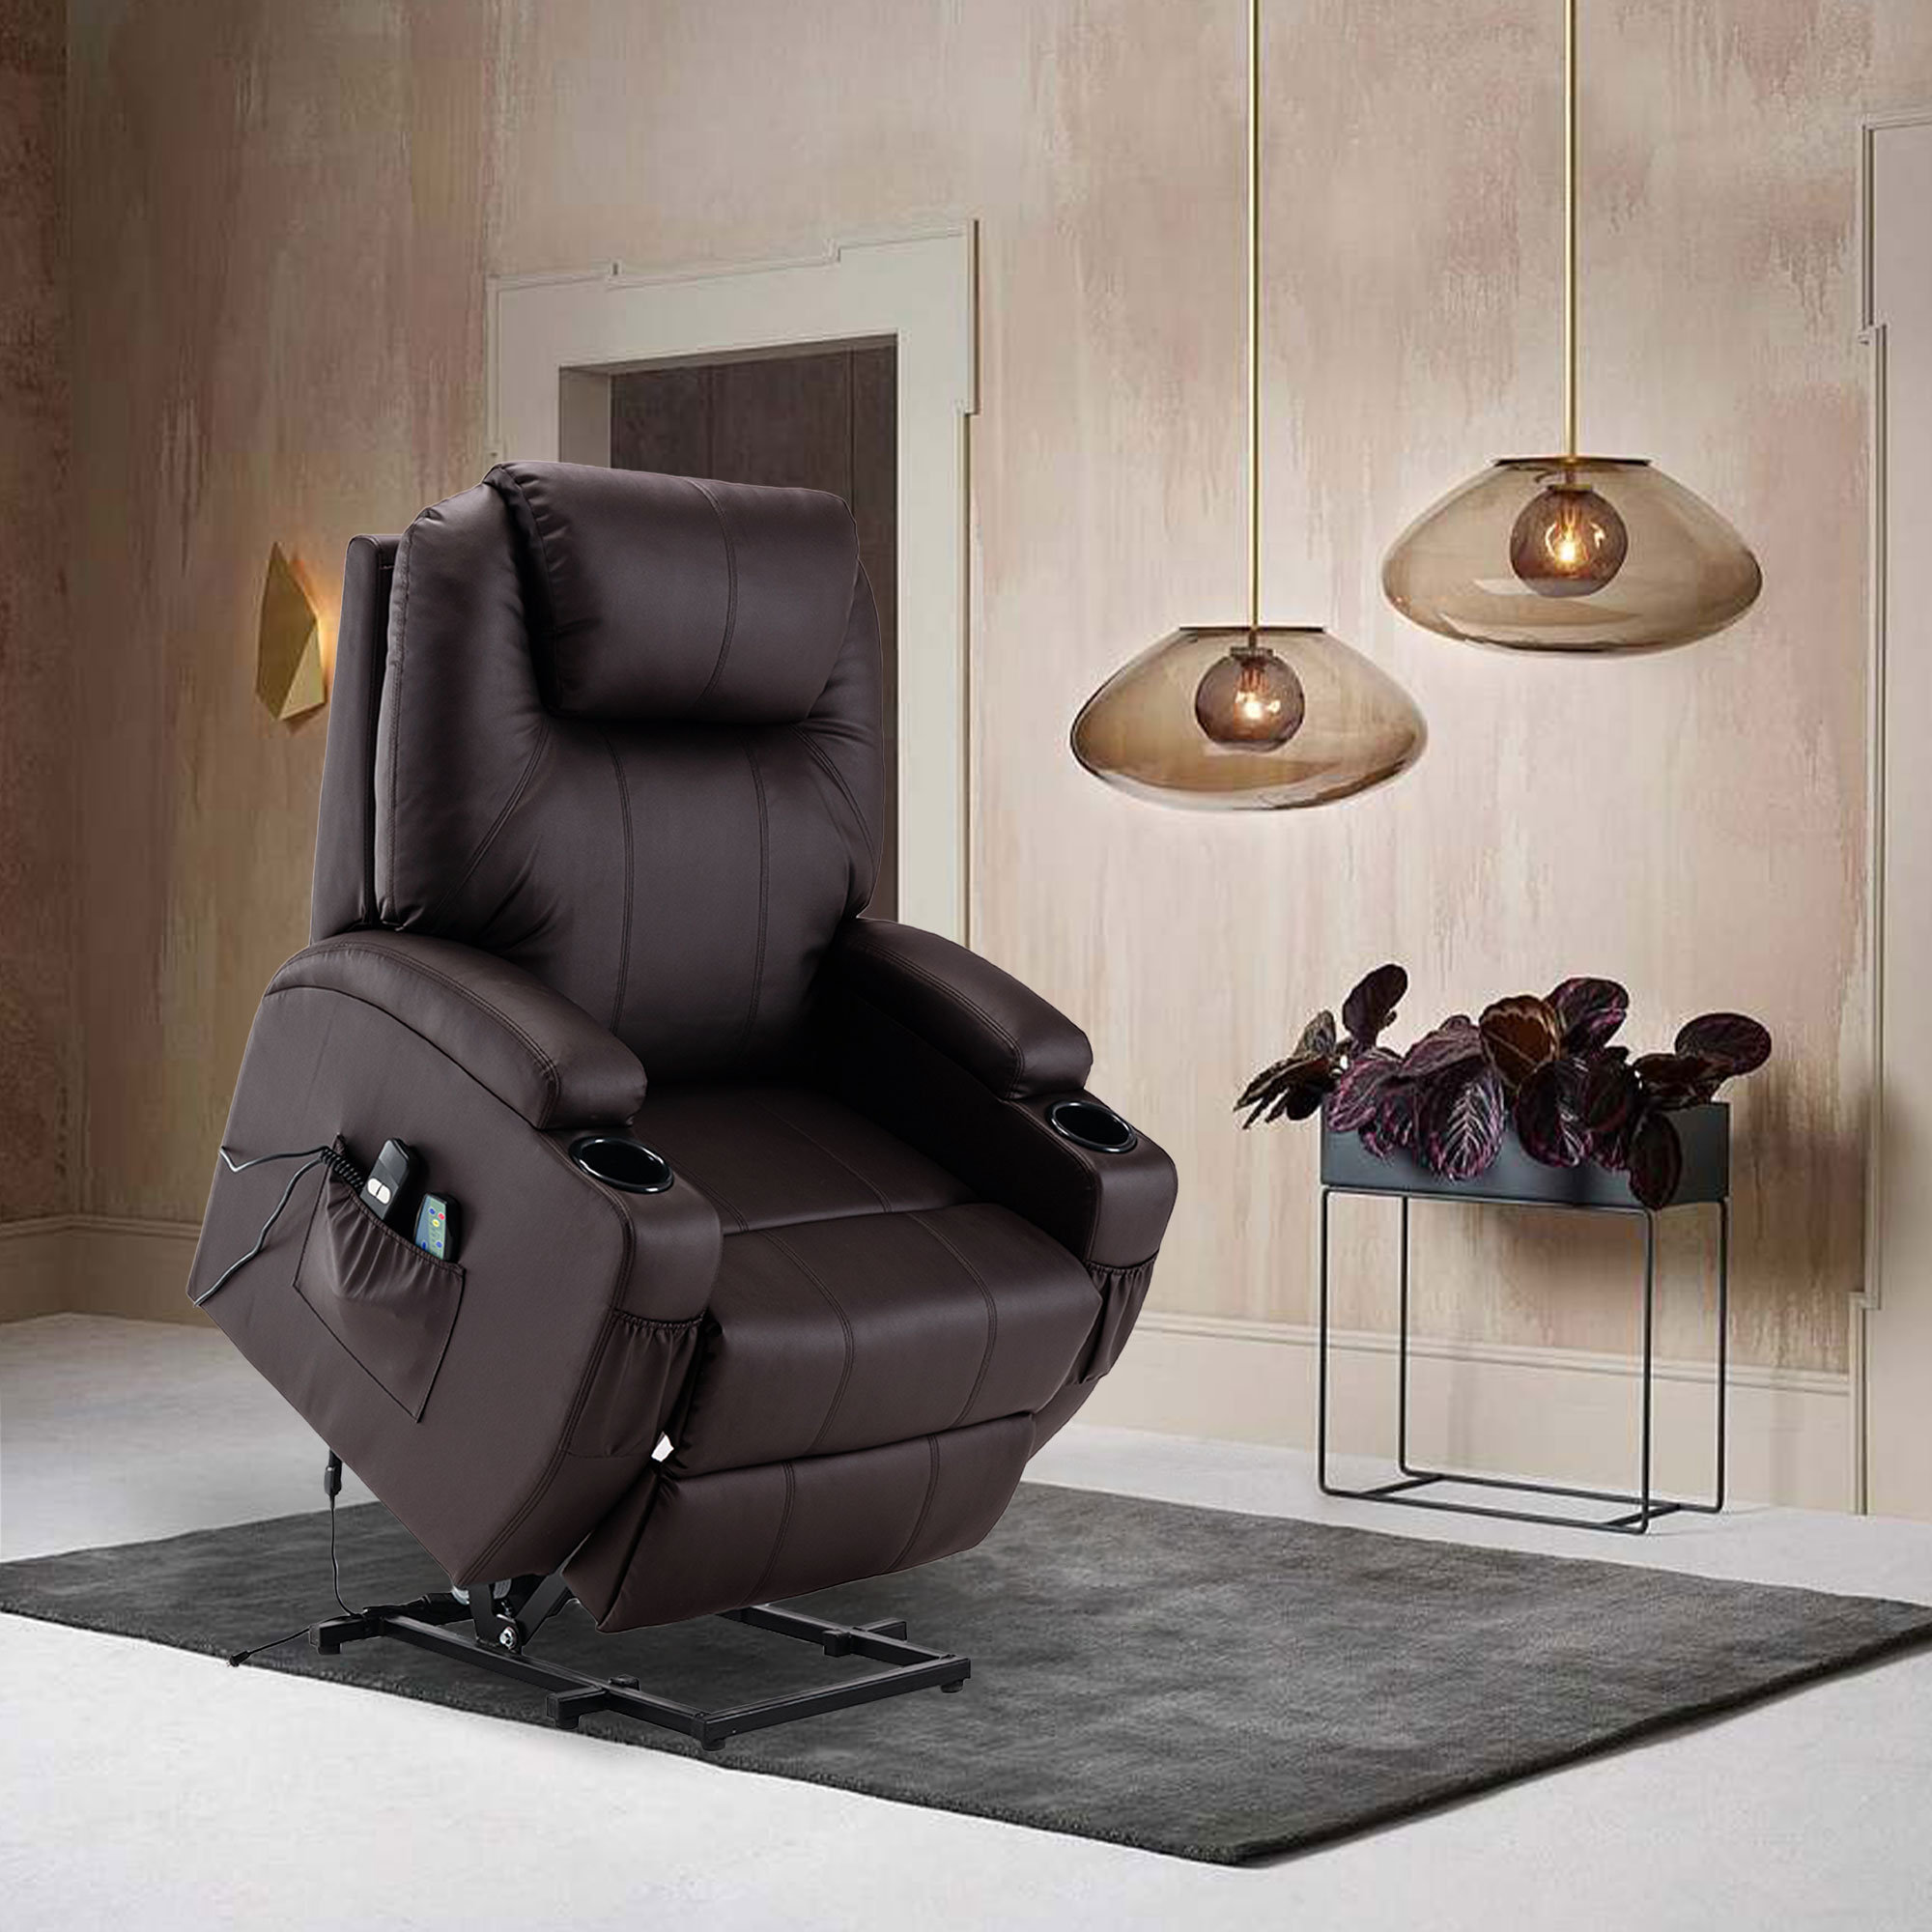 Power Lift Chair Recliner, Electric for Elderly, with Heating Vibration Massage, Remote Control Latitude Run Body Fabric: Black Faux Leather